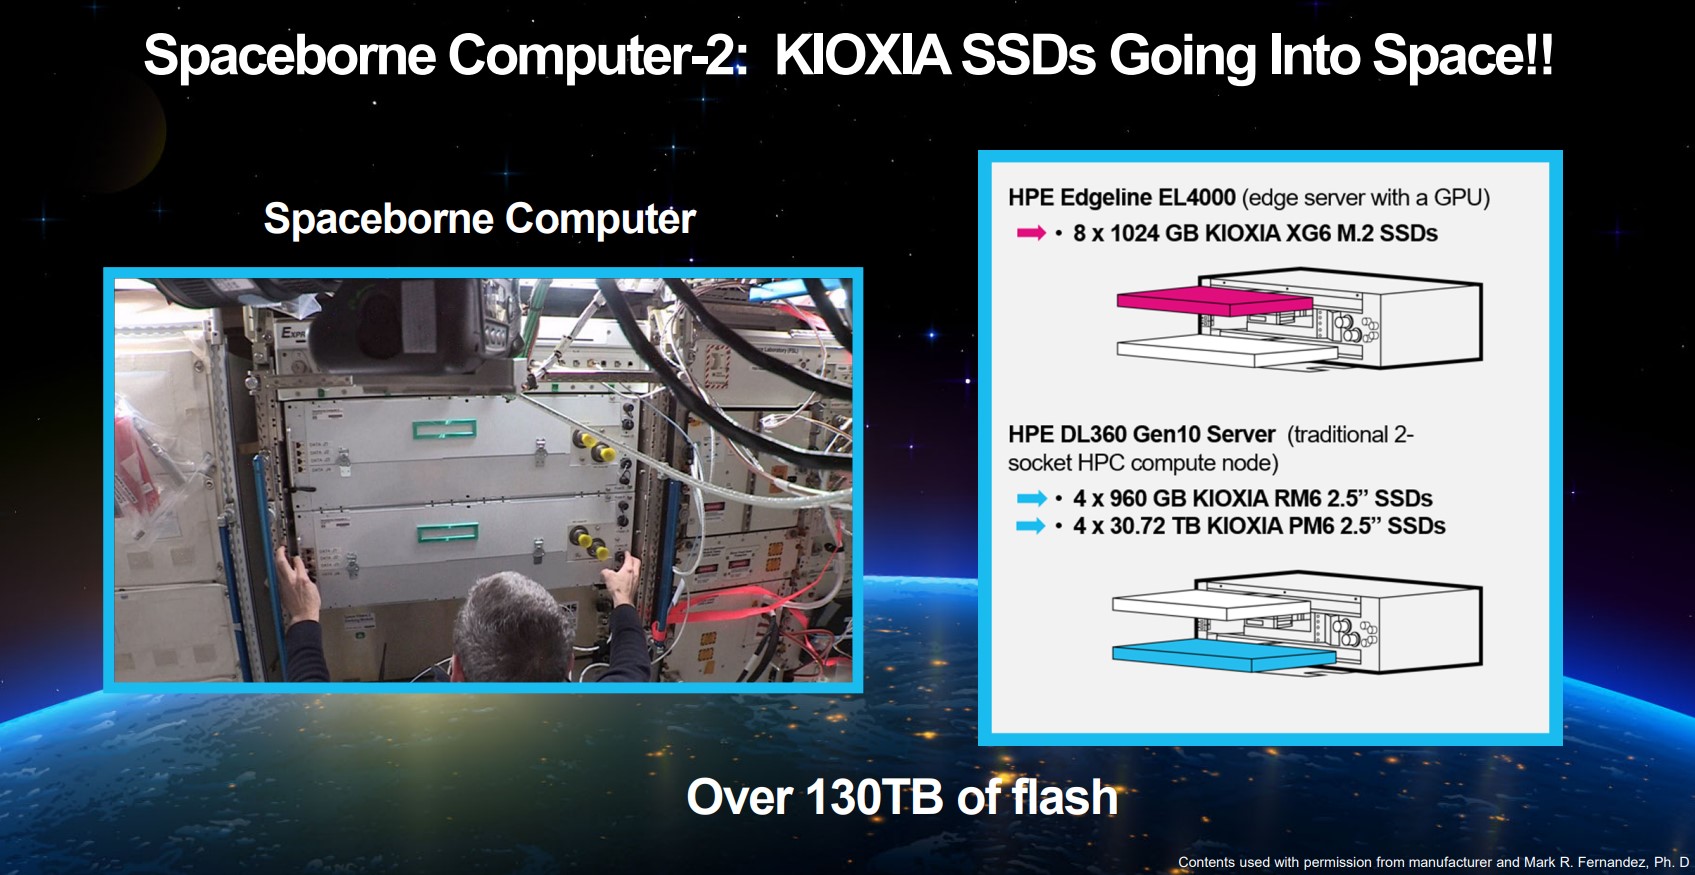 Spaceborne Computer-2 made by HPE using over 310TB Kioxia's SSDs